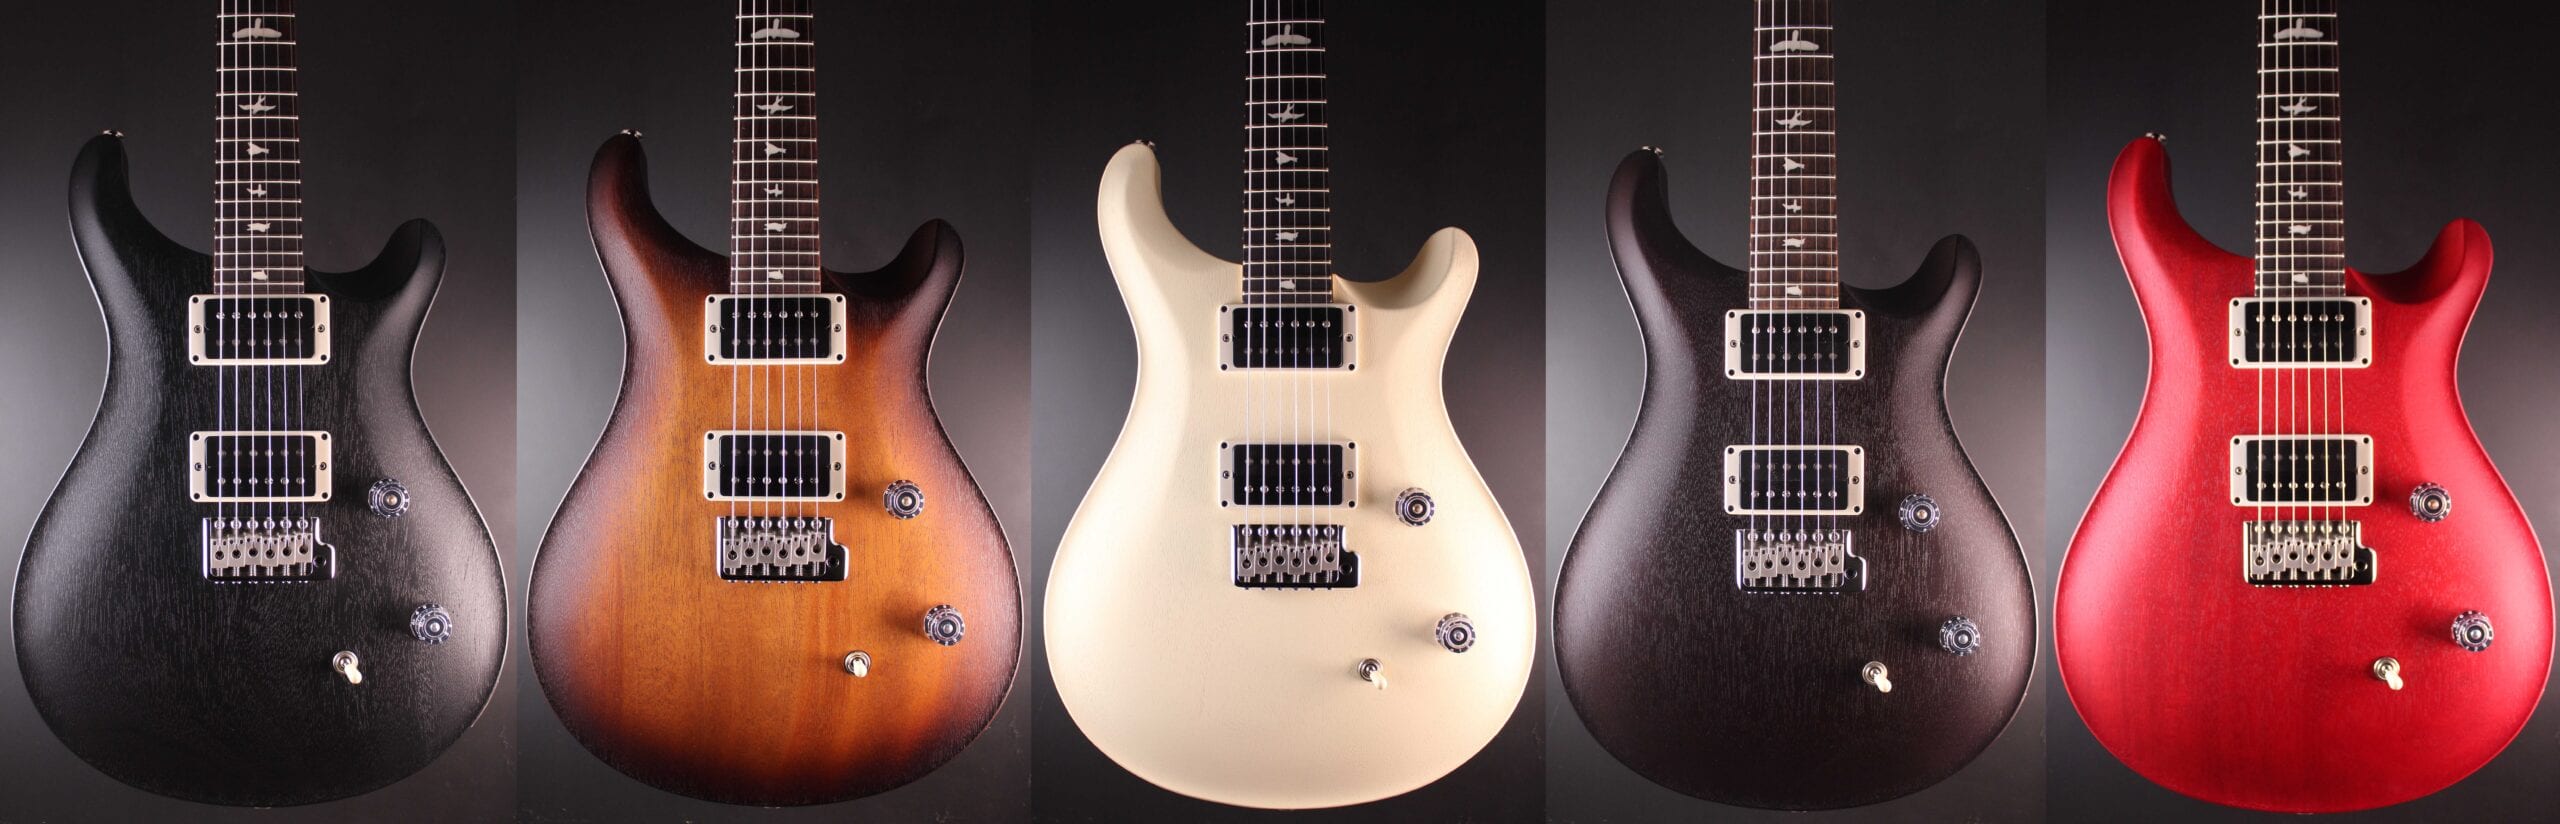 PRS Guitars Europe launches CE 24 Standard Satin Limited Run